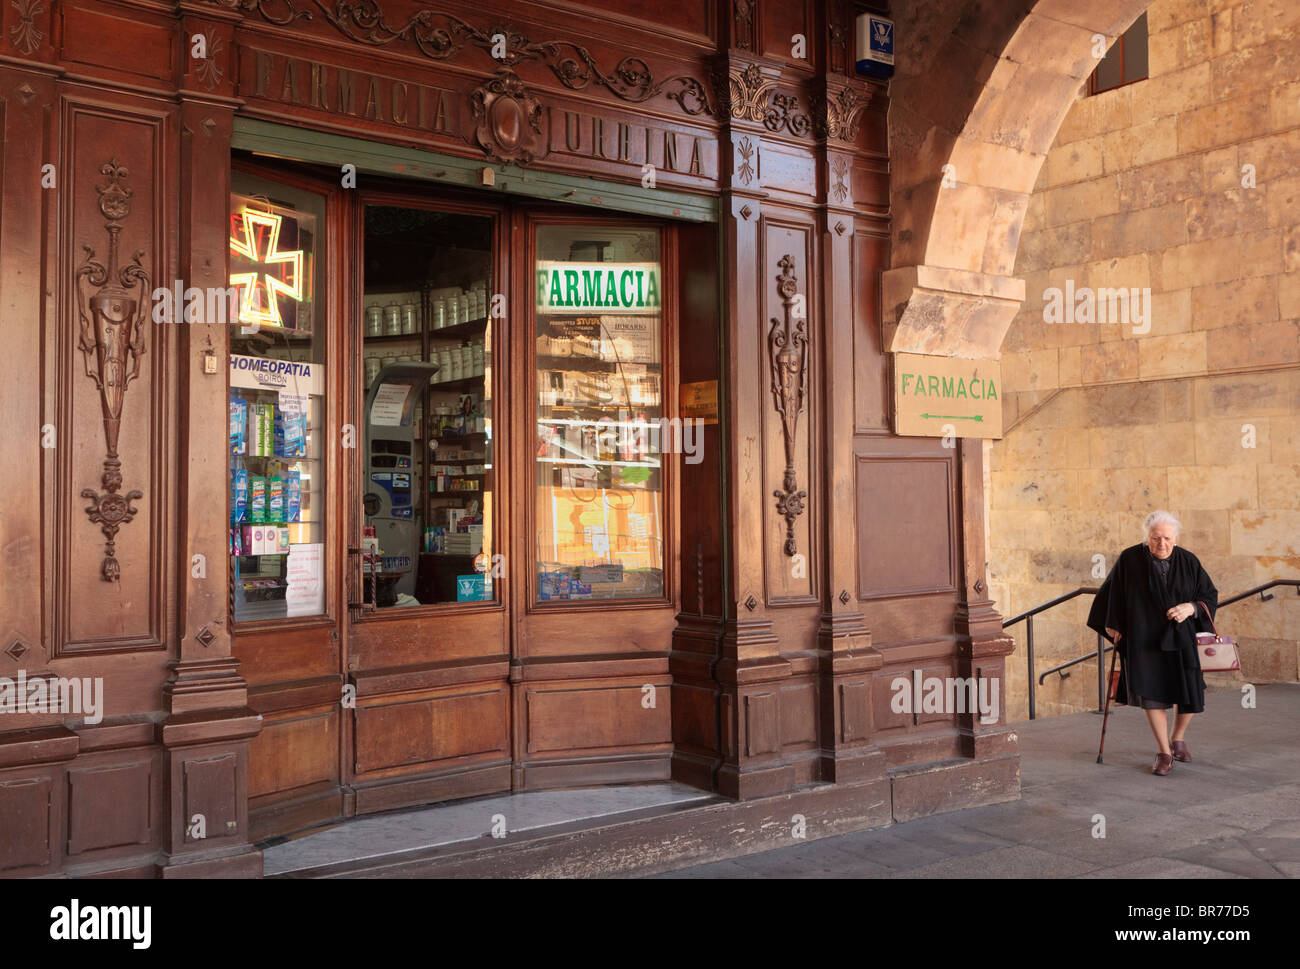 Woman Dressed In Black Walking By Wooden Fronted Chemist Shop In The Plaza Mayor; Salamanca, Salamanca Province, Spain Stock Photo